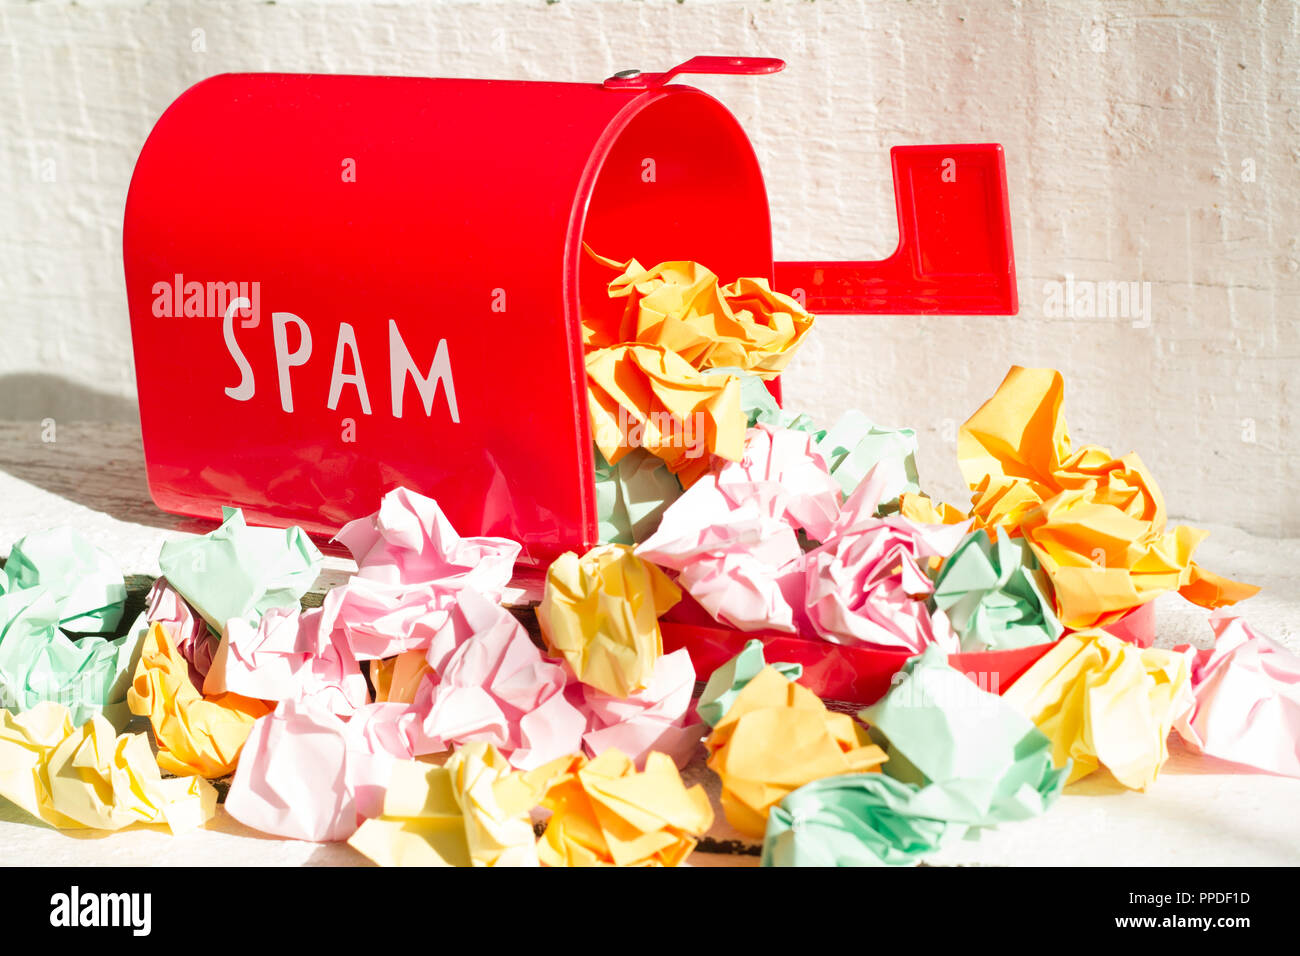 Full red mailbox of spam problem abstract on white background Stock Photo